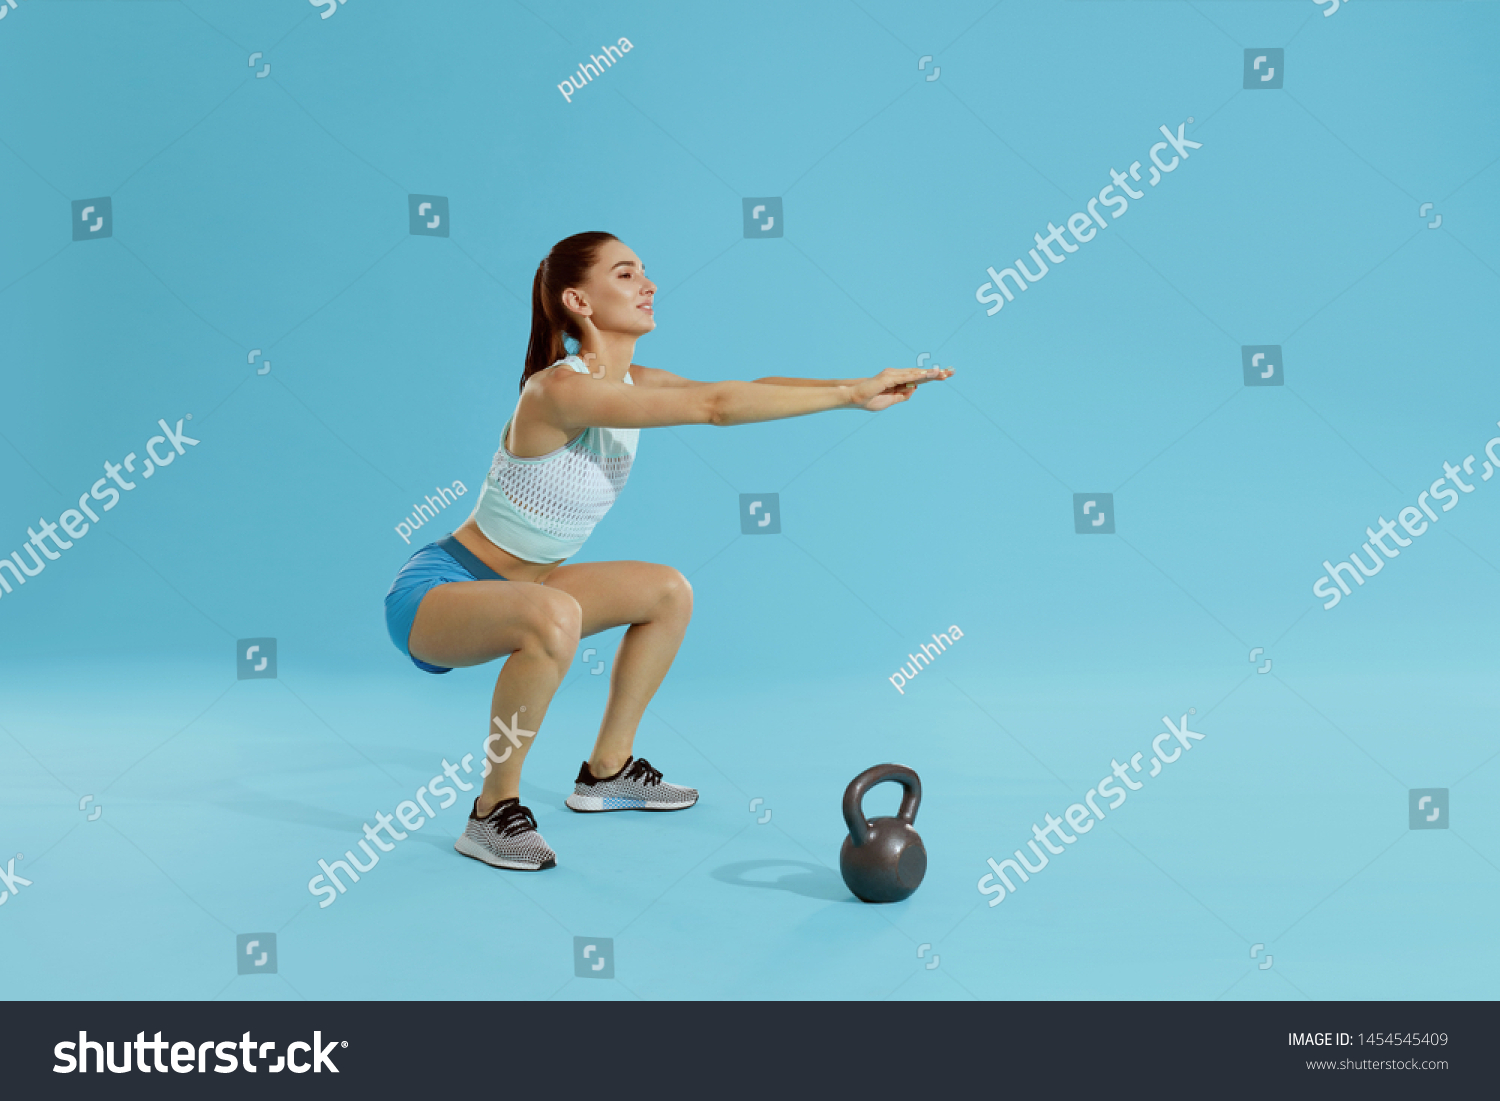 Squats. Fitness woman in sports wear exercising, doing squat workout at studio. Full length portrait of fit girl squatting on blue background #1454545409